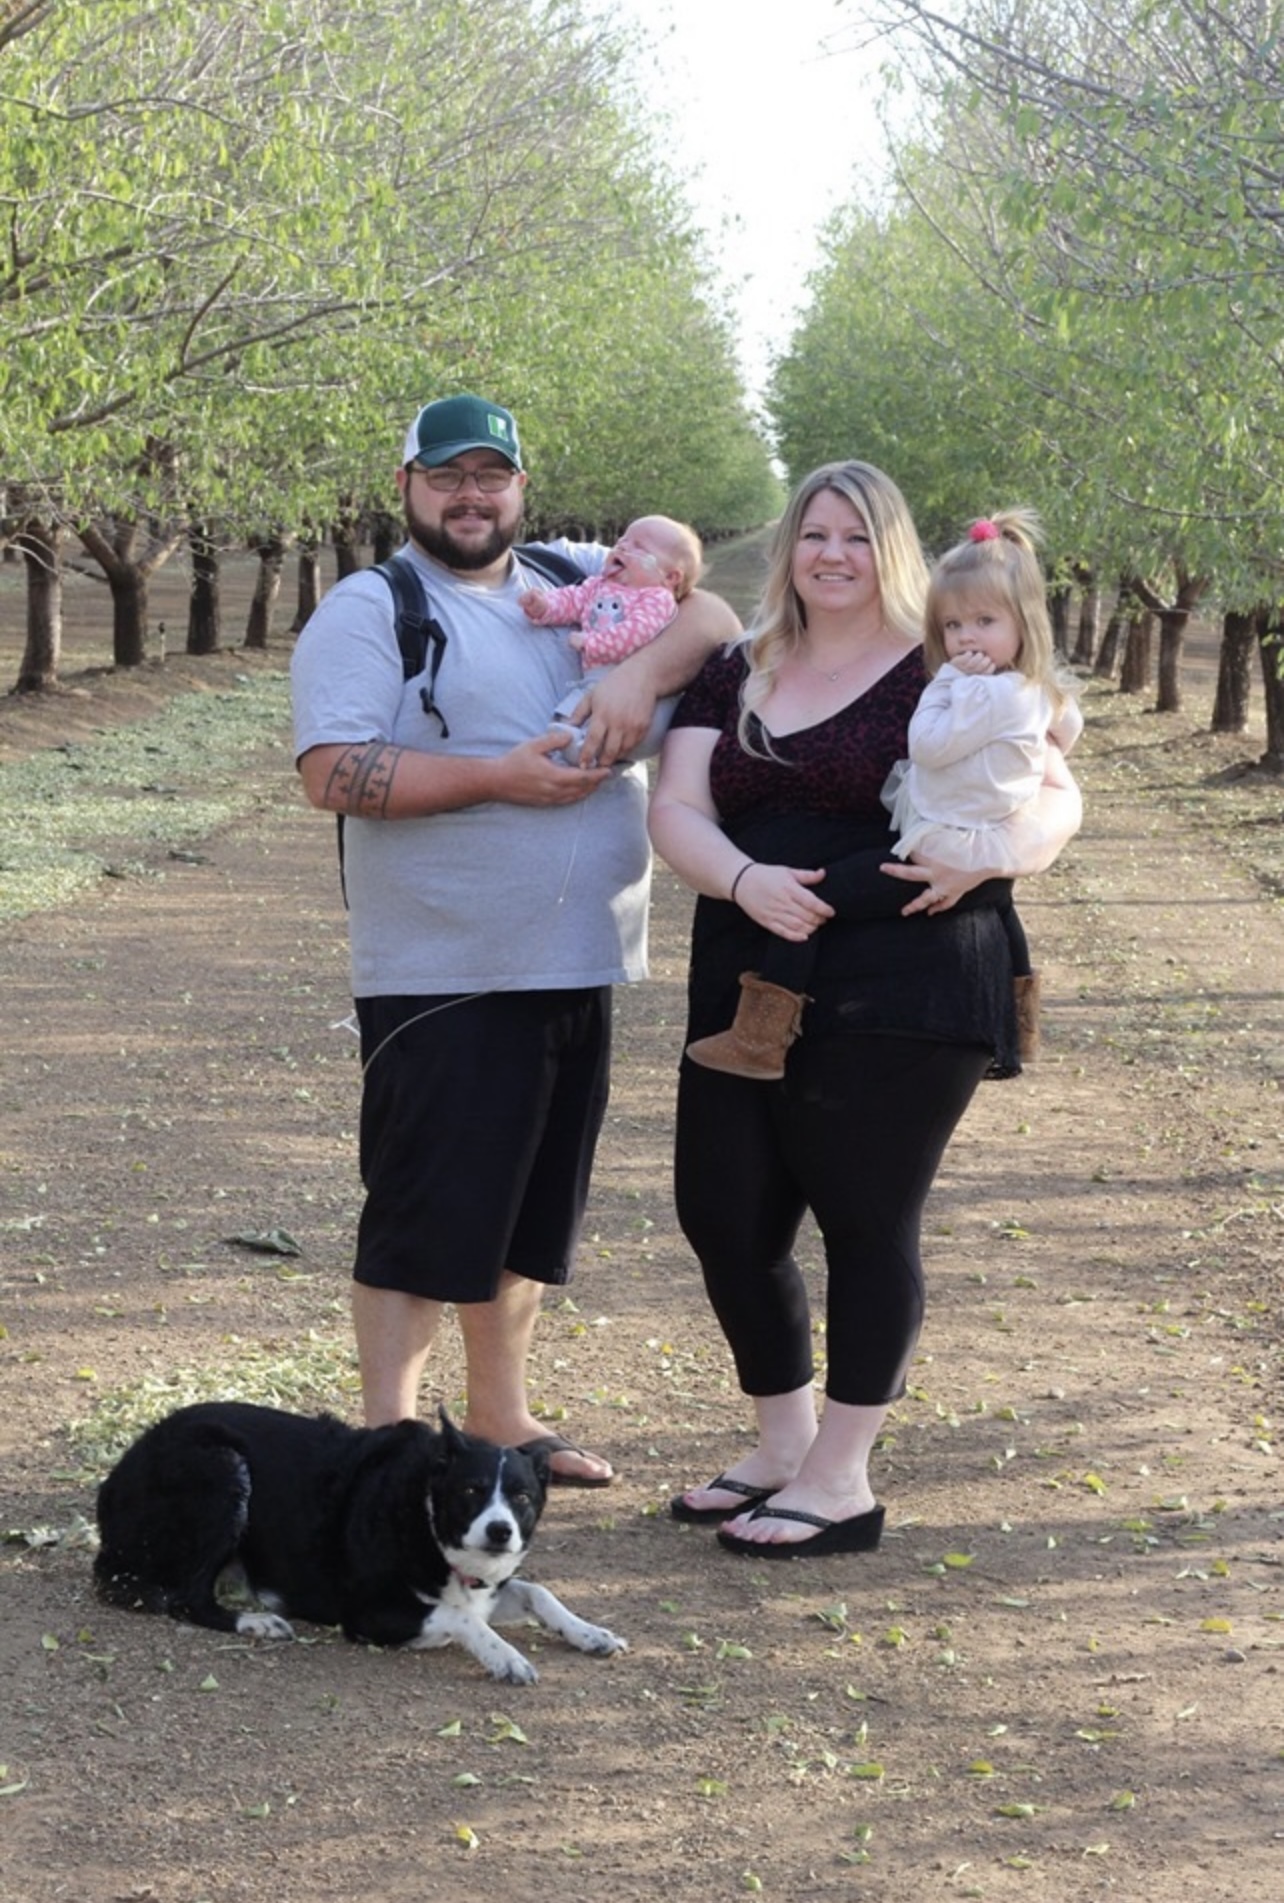 Hannah Ellis and family with an orchard in the background